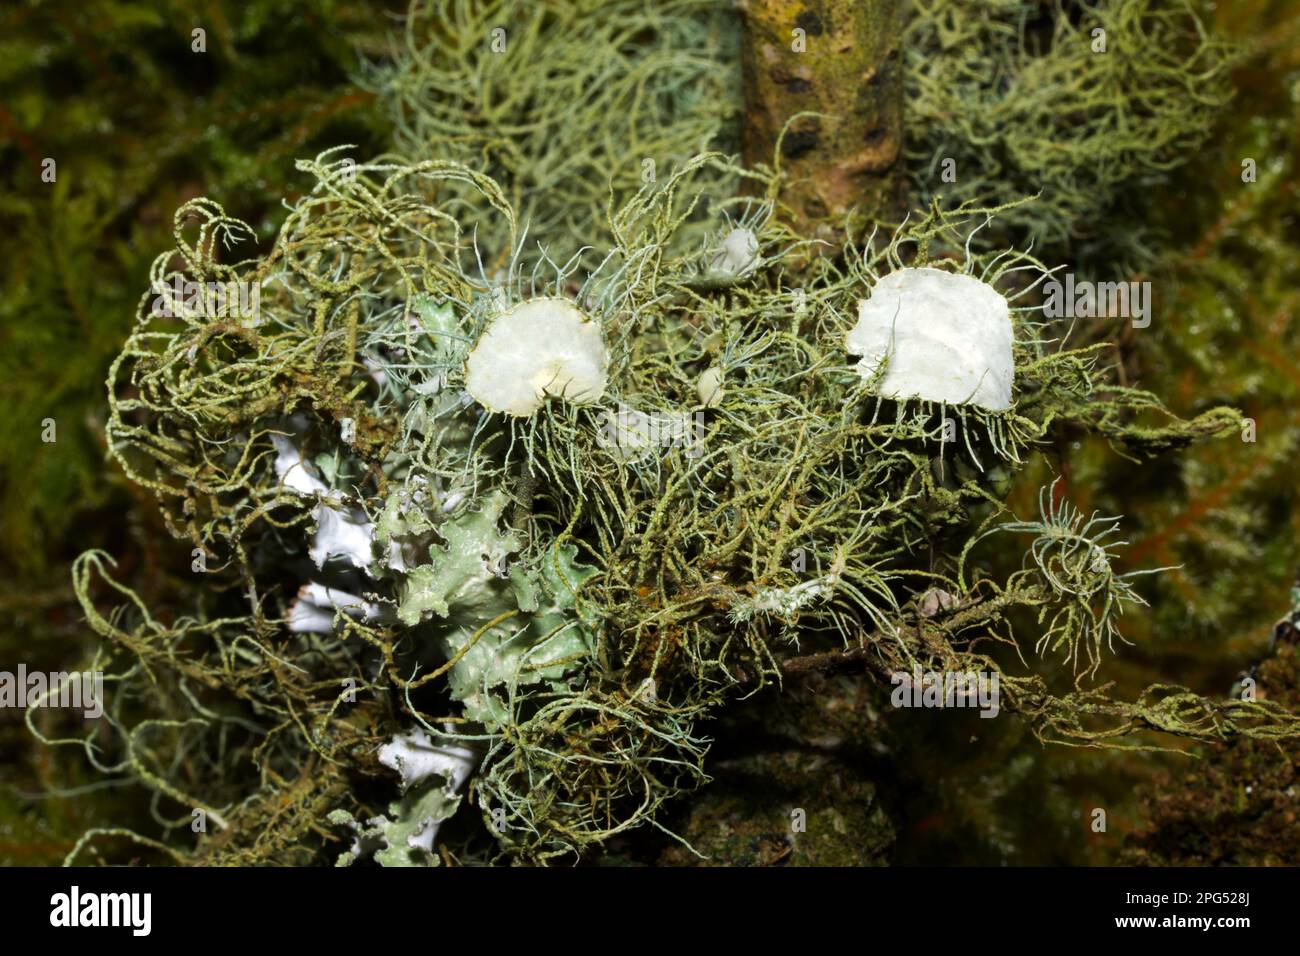 Usnea florida (flowery lichen) is a species of beard lichen usually found on twigs and branches. It is widely distributed. Stock Photo